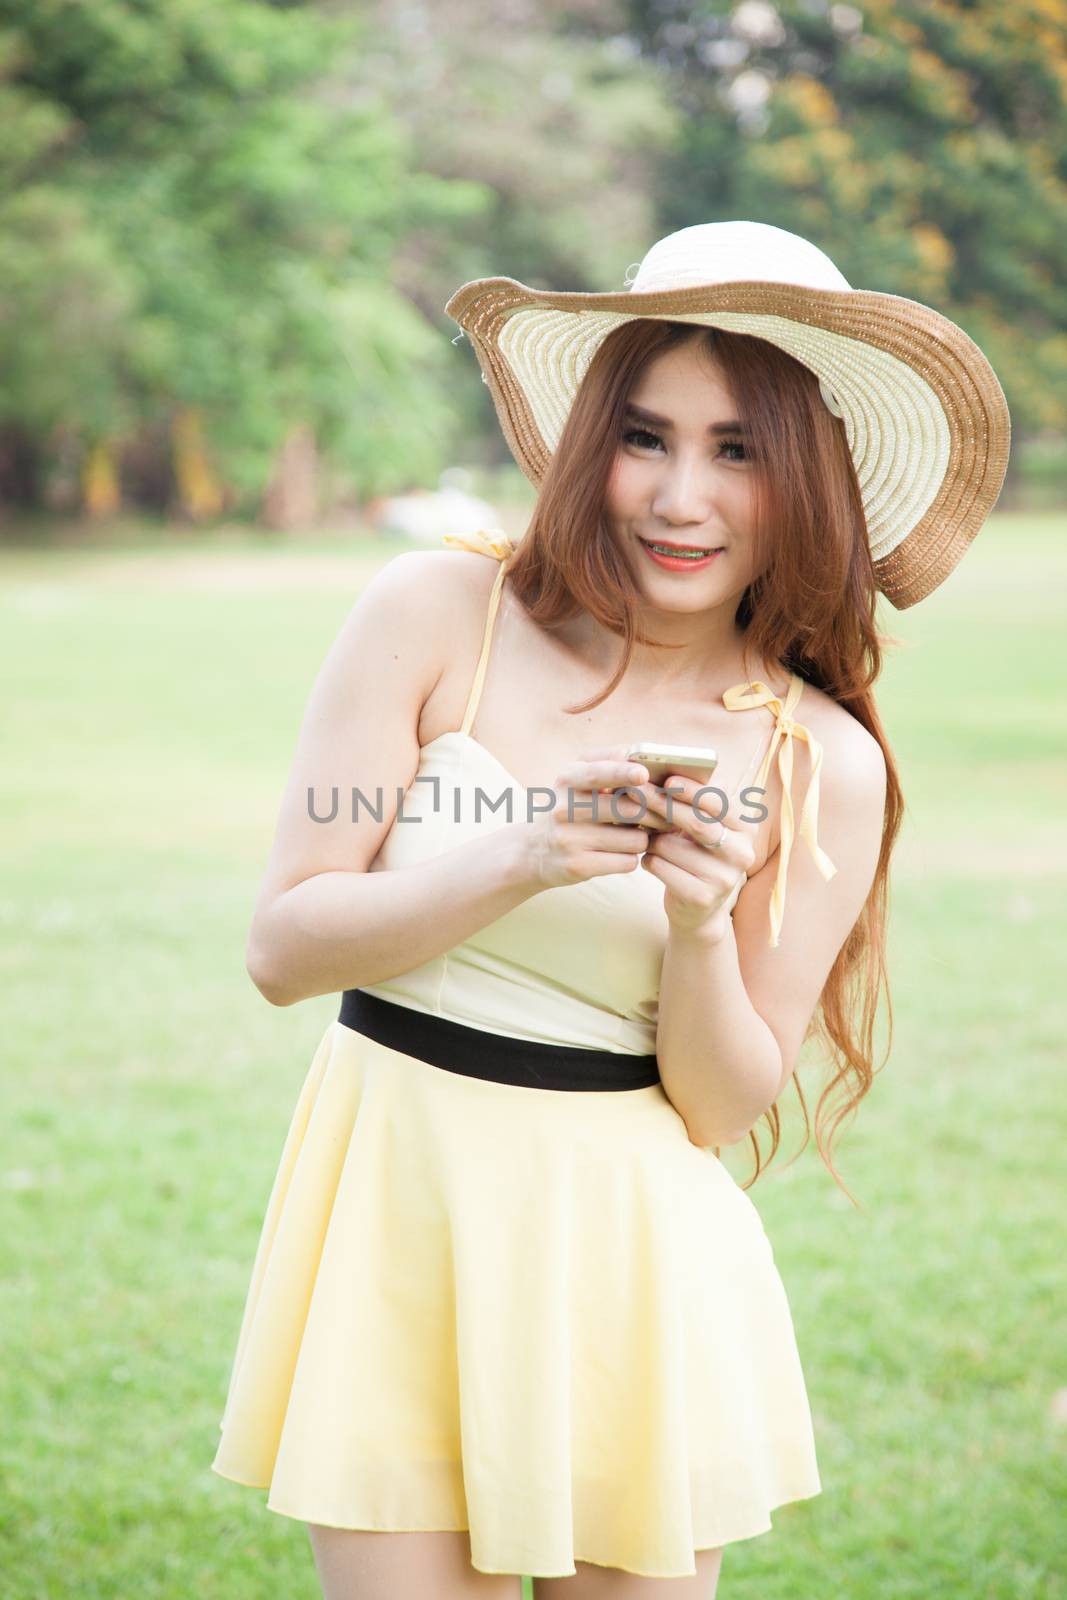 Asian woman smiling and holding a mobile phone. In the park